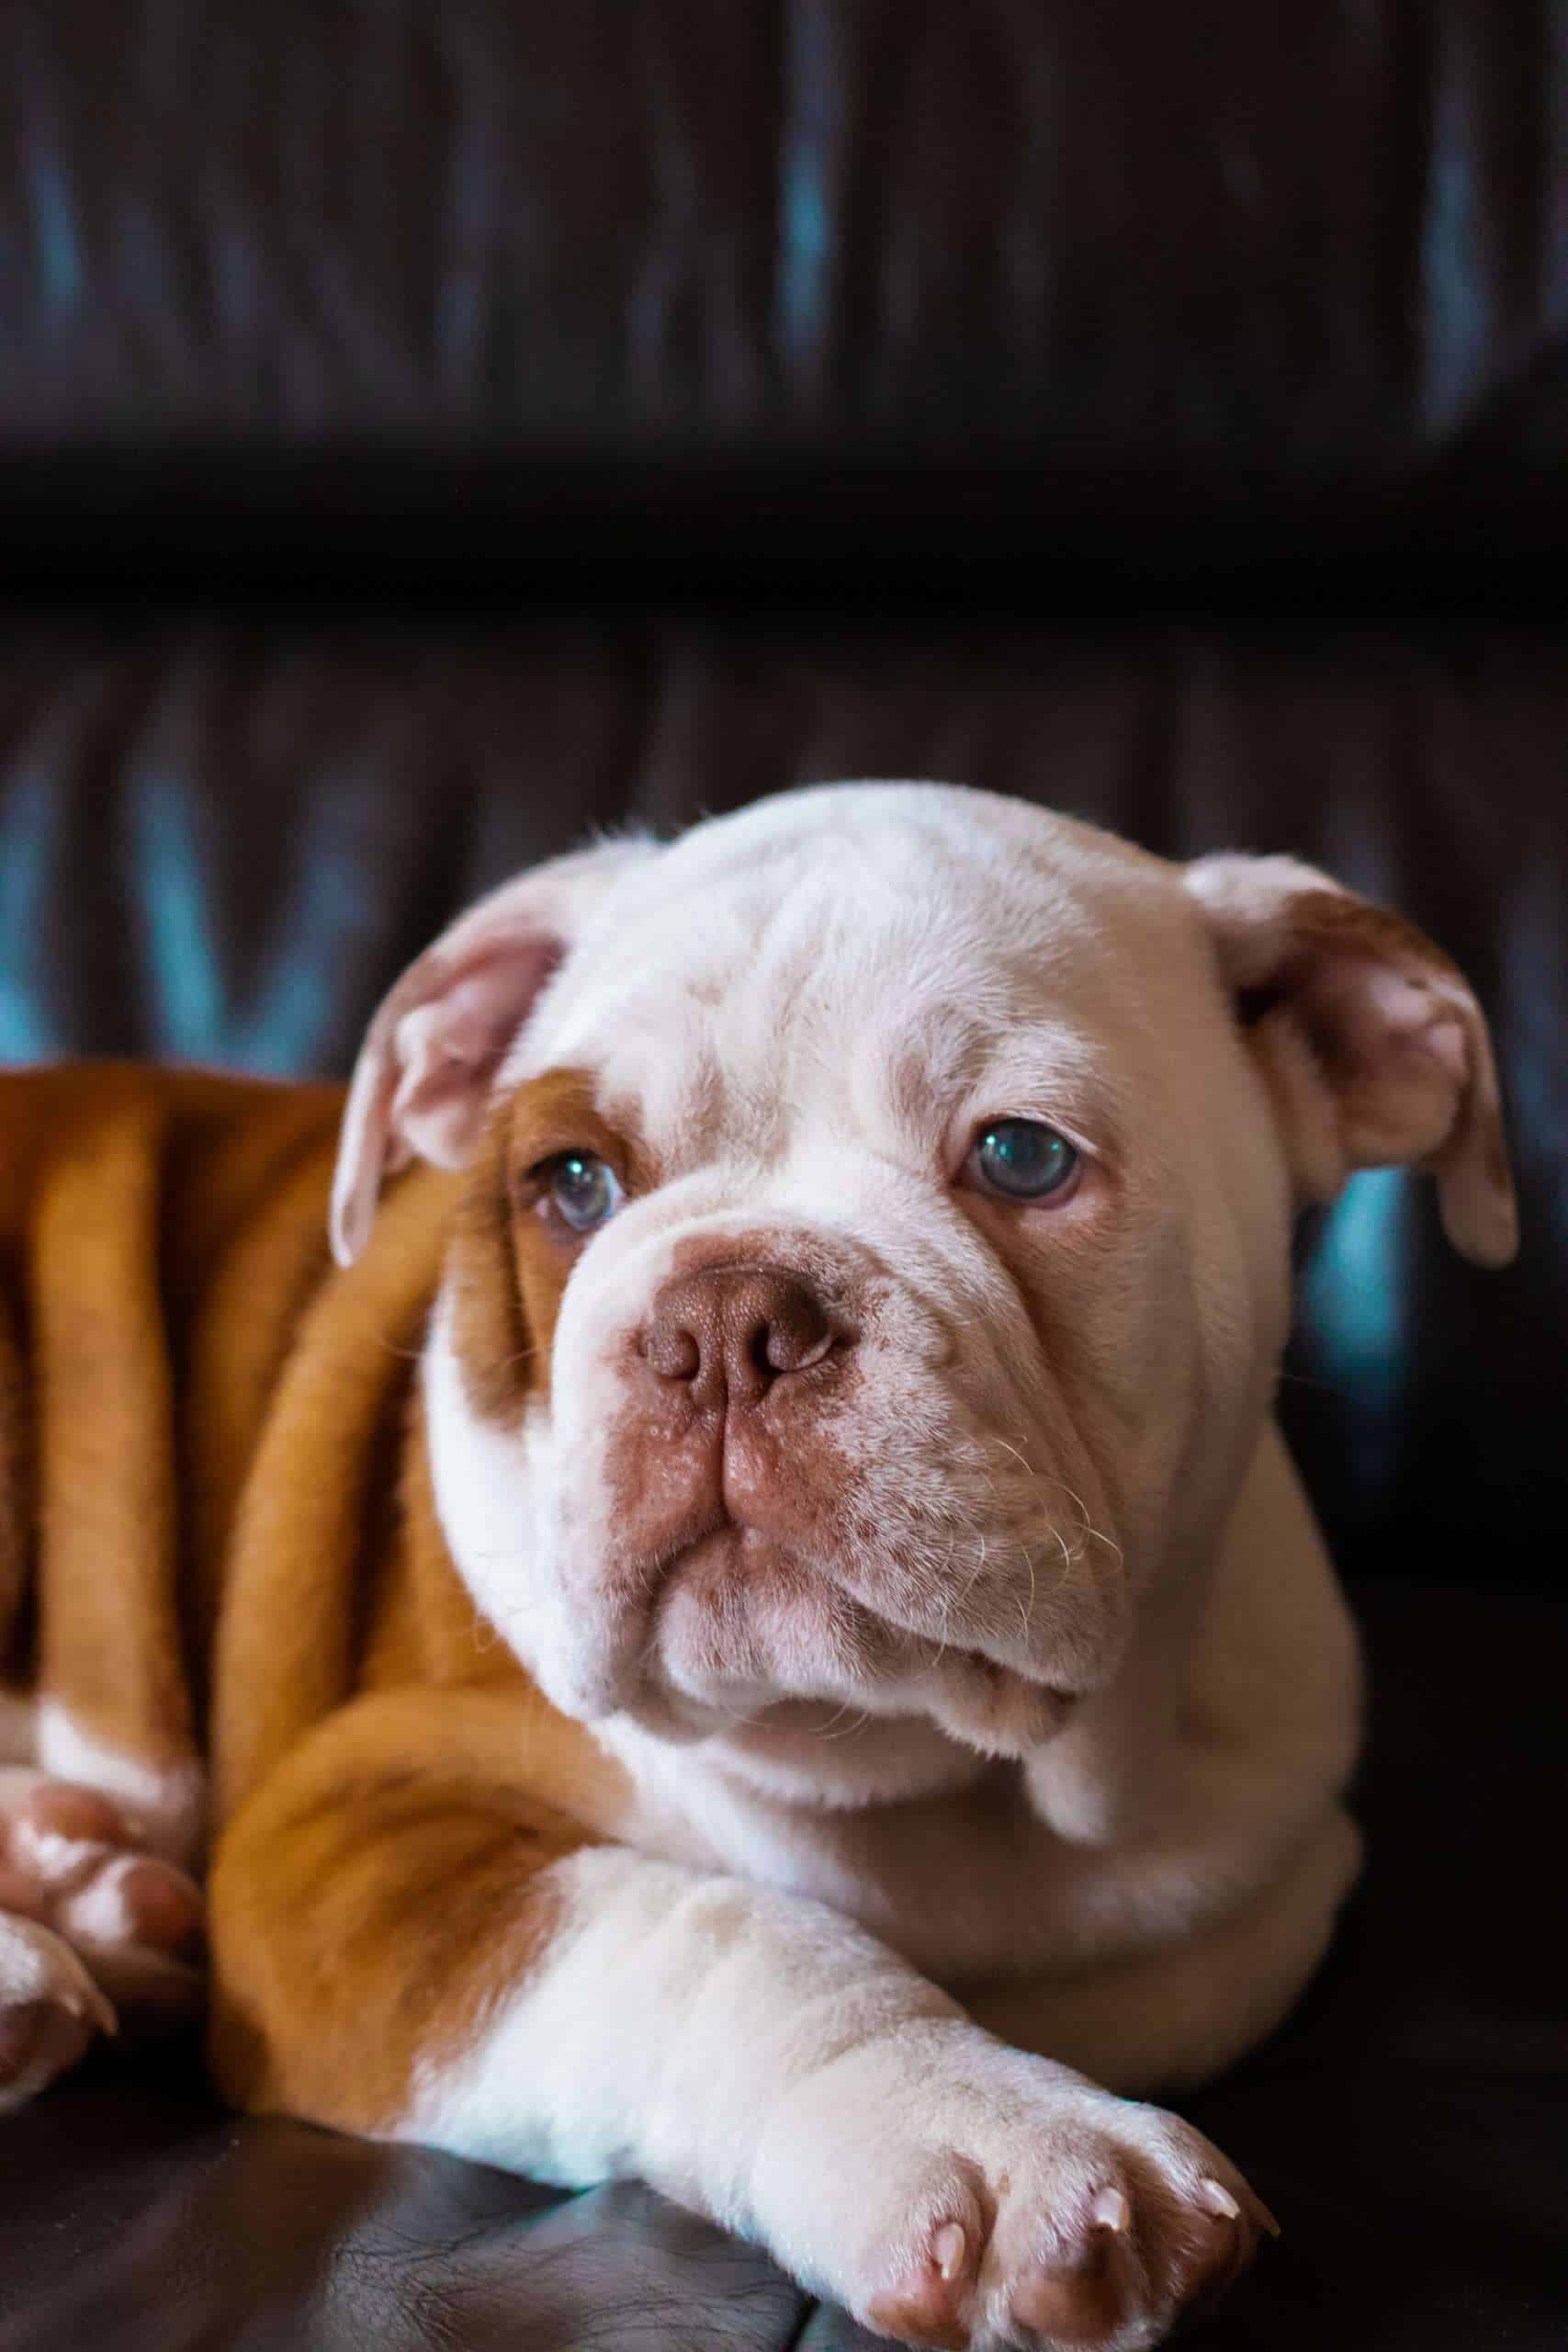 How to care for an English Bulldog?